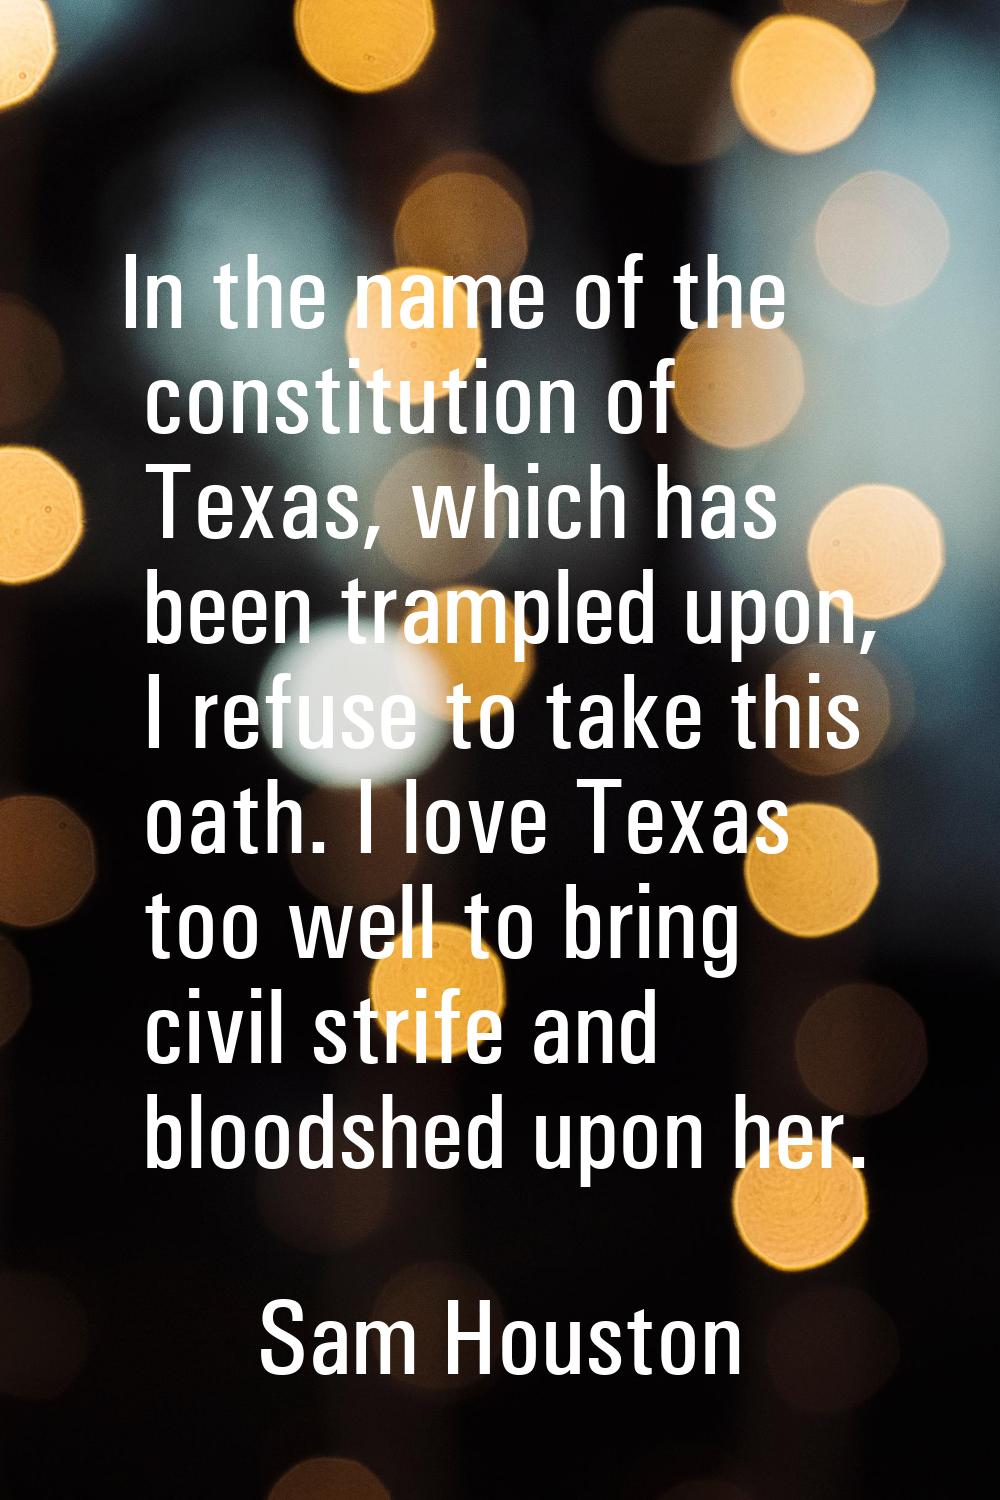 In the name of the constitution of Texas, which has been trampled upon, I refuse to take this oath.